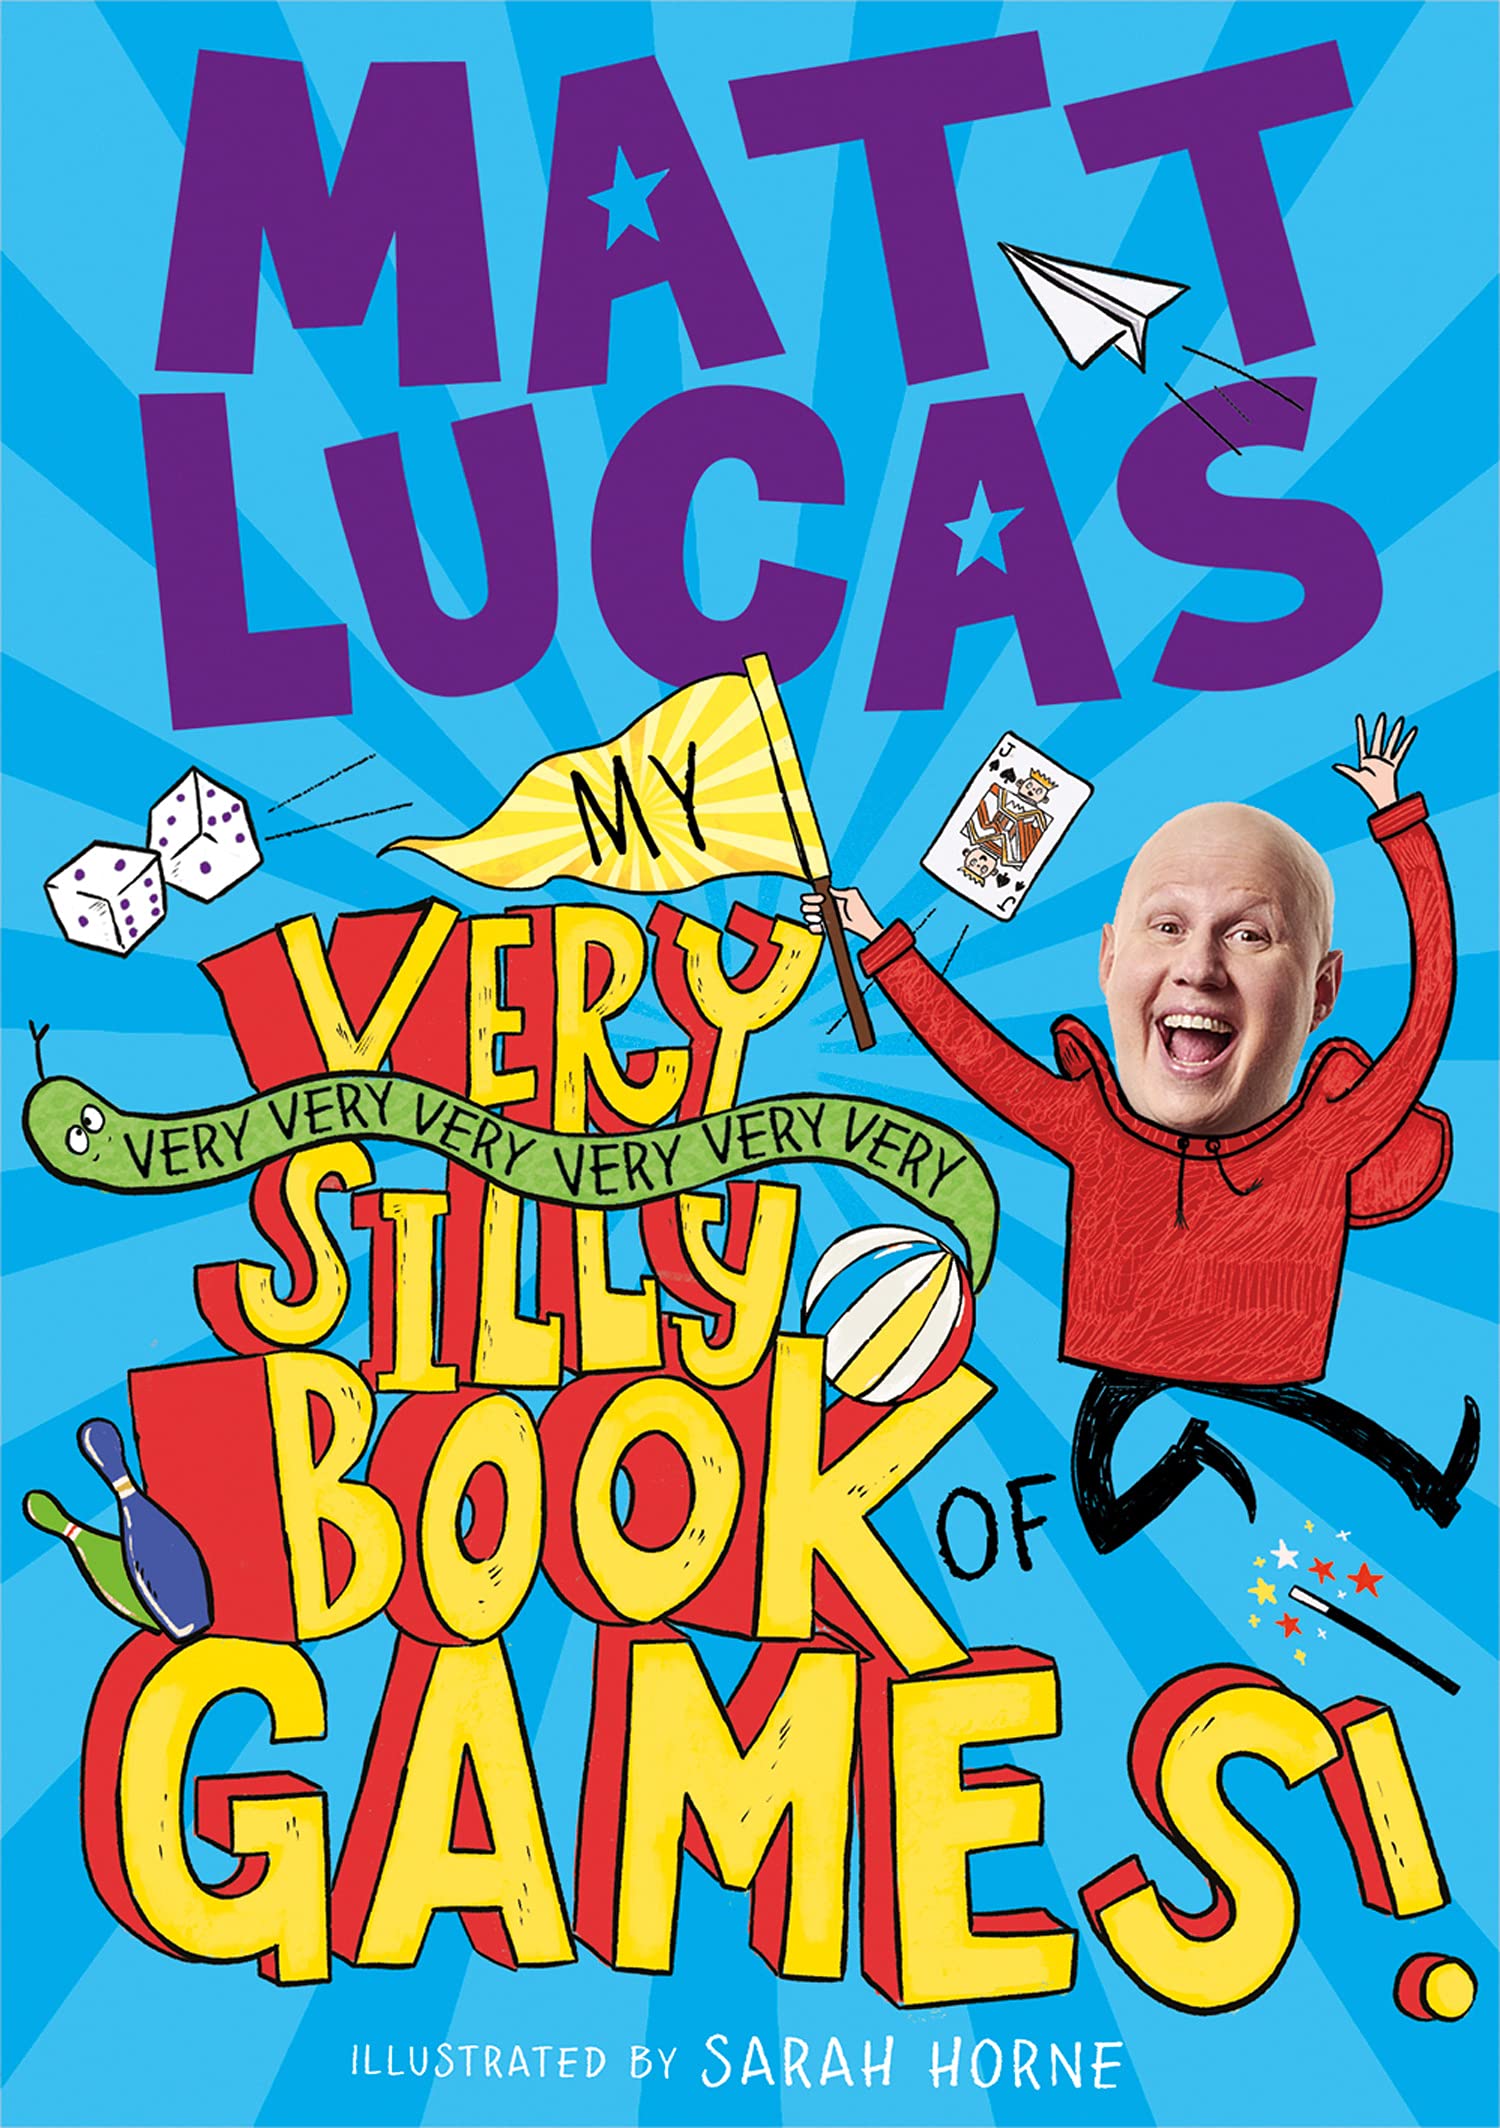 MY VERY VERY VERY VERY VERY VERY VERY SILLY BOOK OF GAMES!